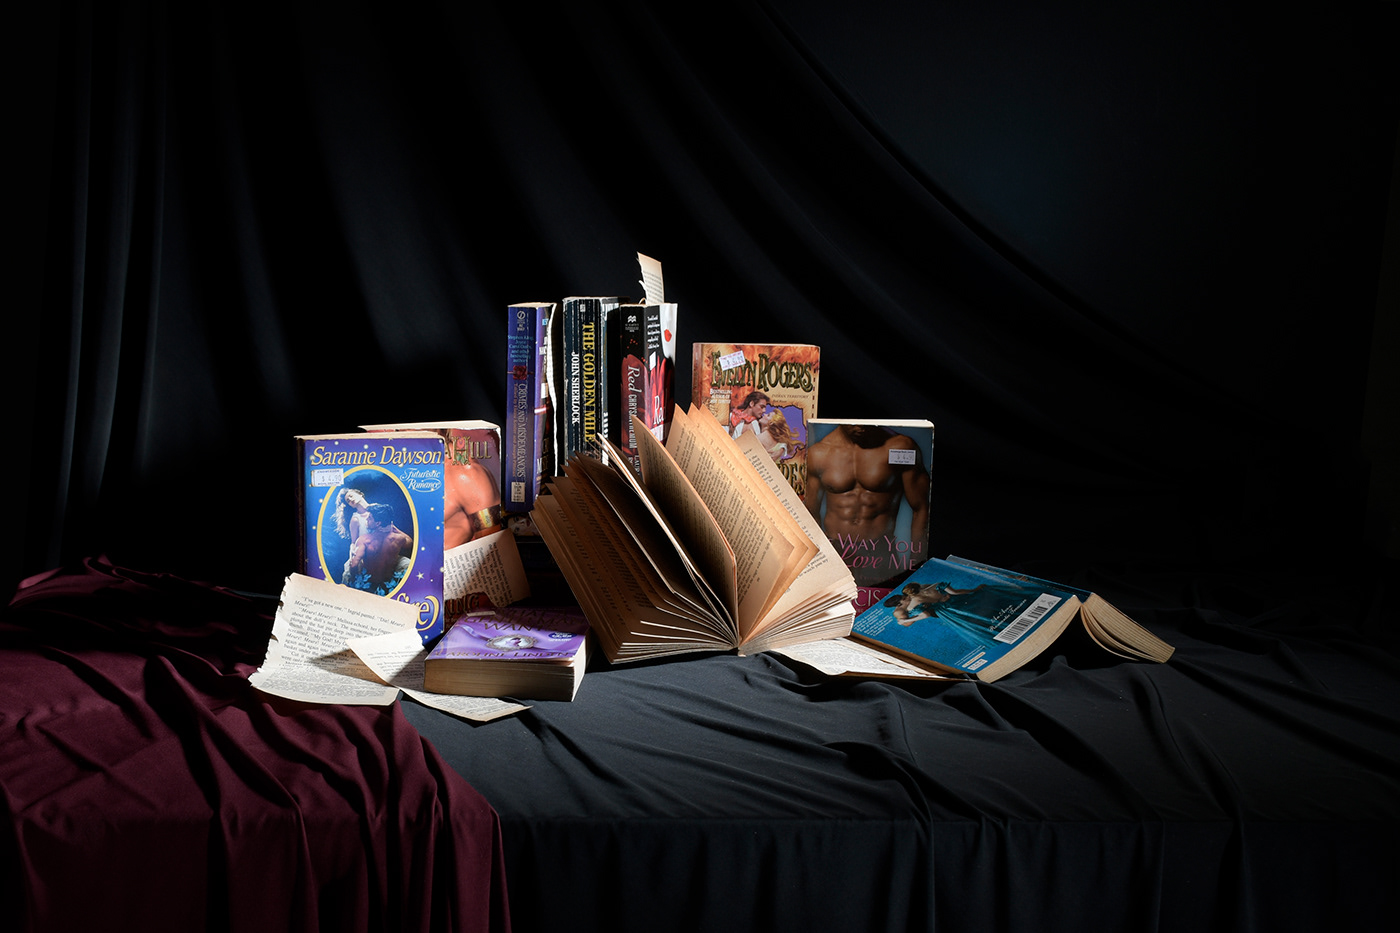 still life Studio Shoot campaign Photography  objects image content